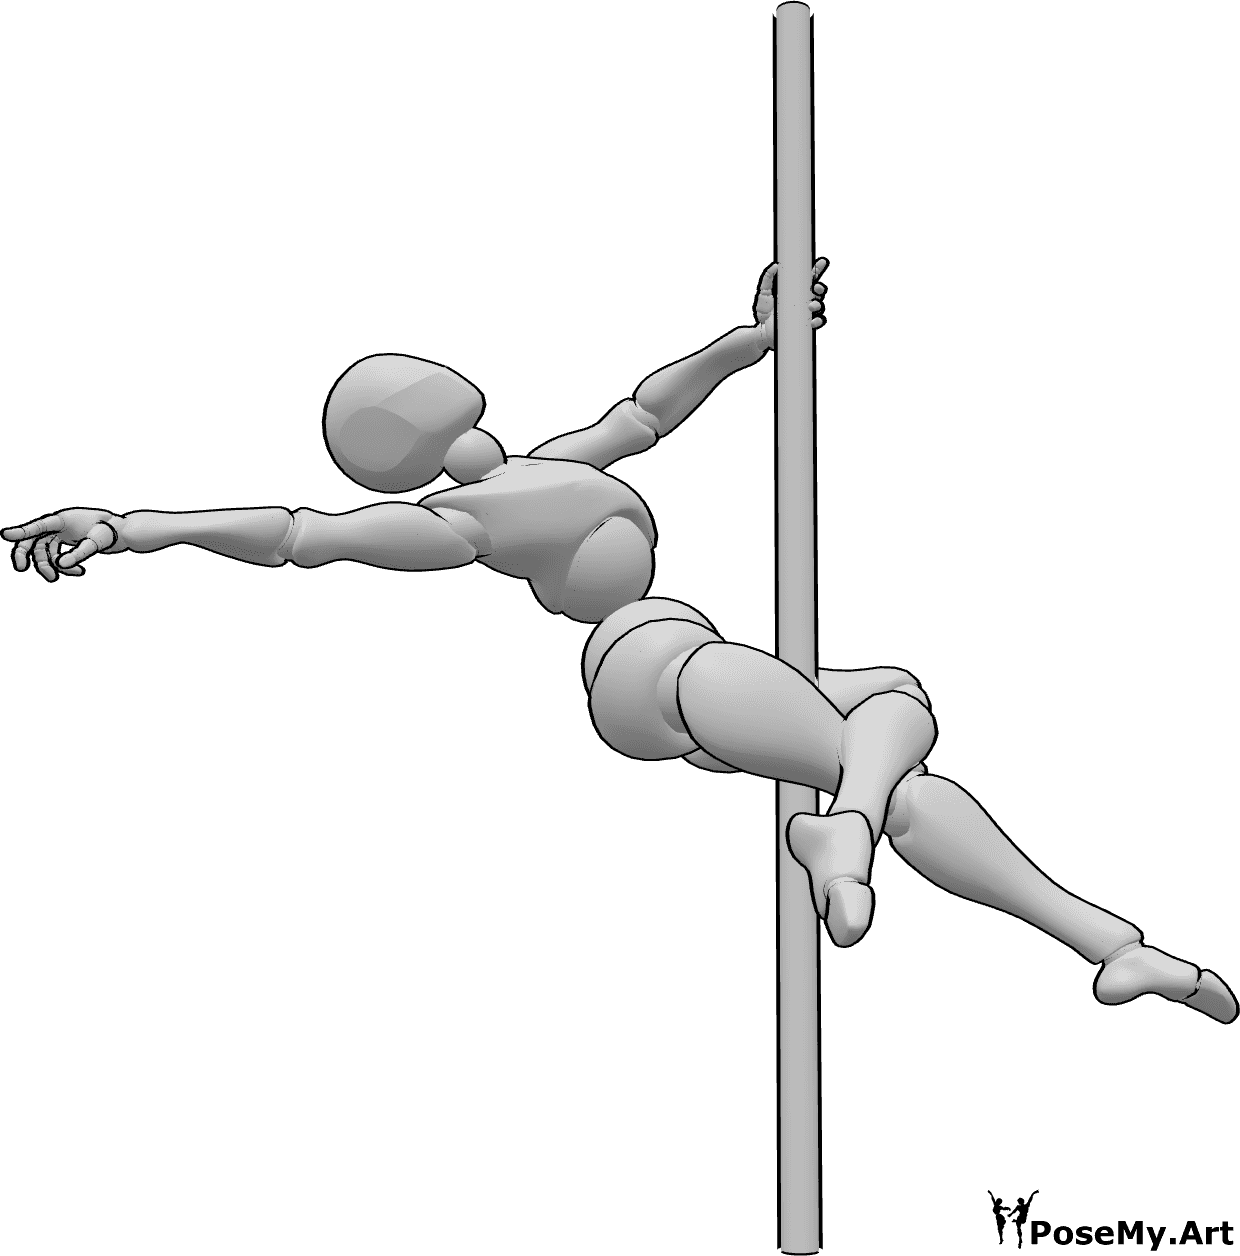 Pose Reference - Crossed legs dance pose - Female is dancing on the pole, holding the pole with her left hand and posing with her legs crossed